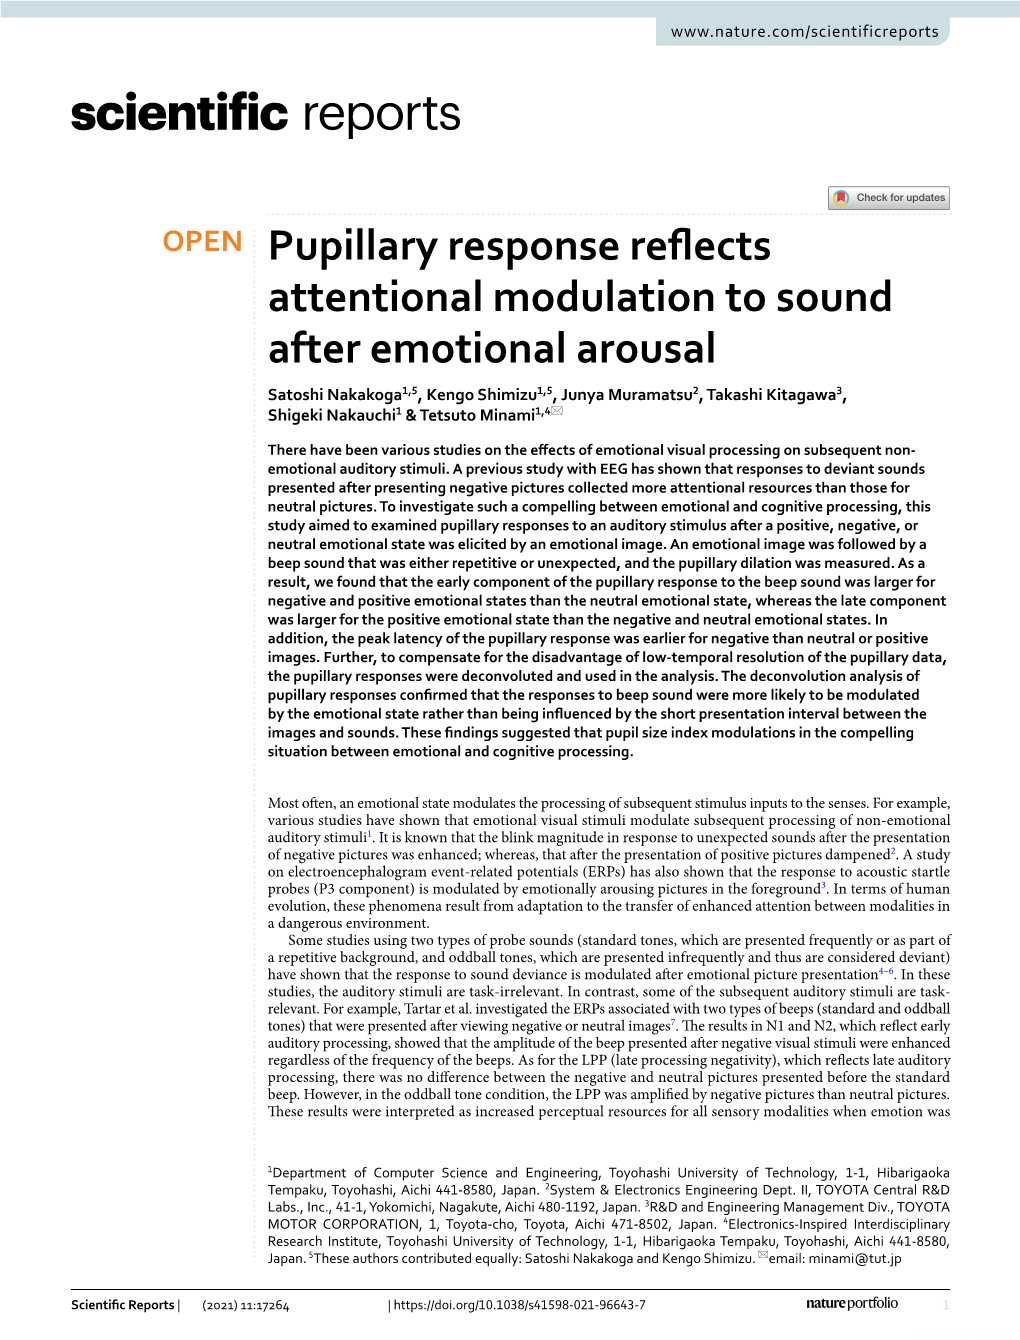 Pupillary Response Reflects Attentional Modulation to Sound After Emotional